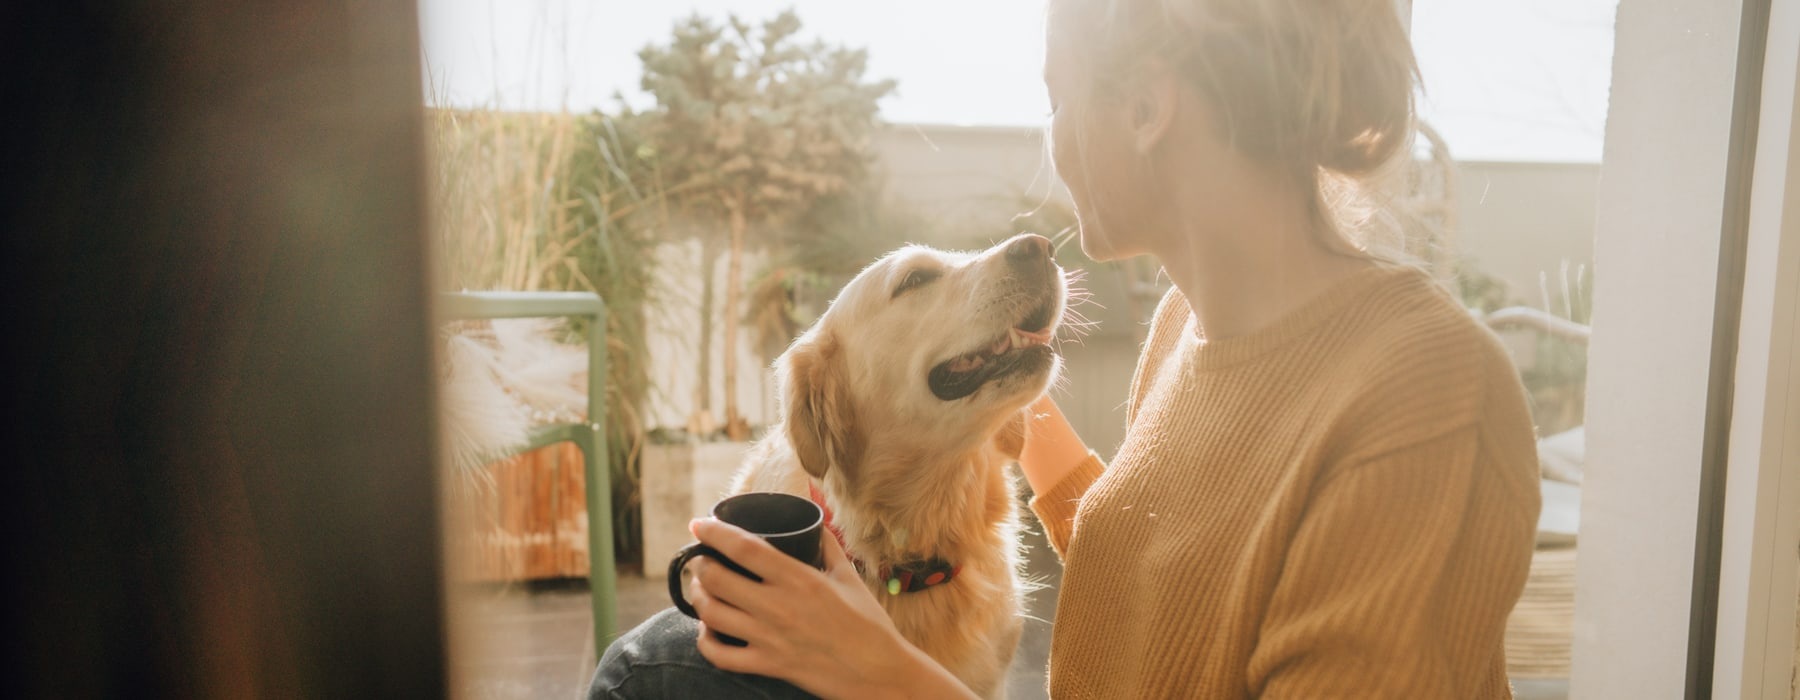 lifestyle image of a woman holding a dog